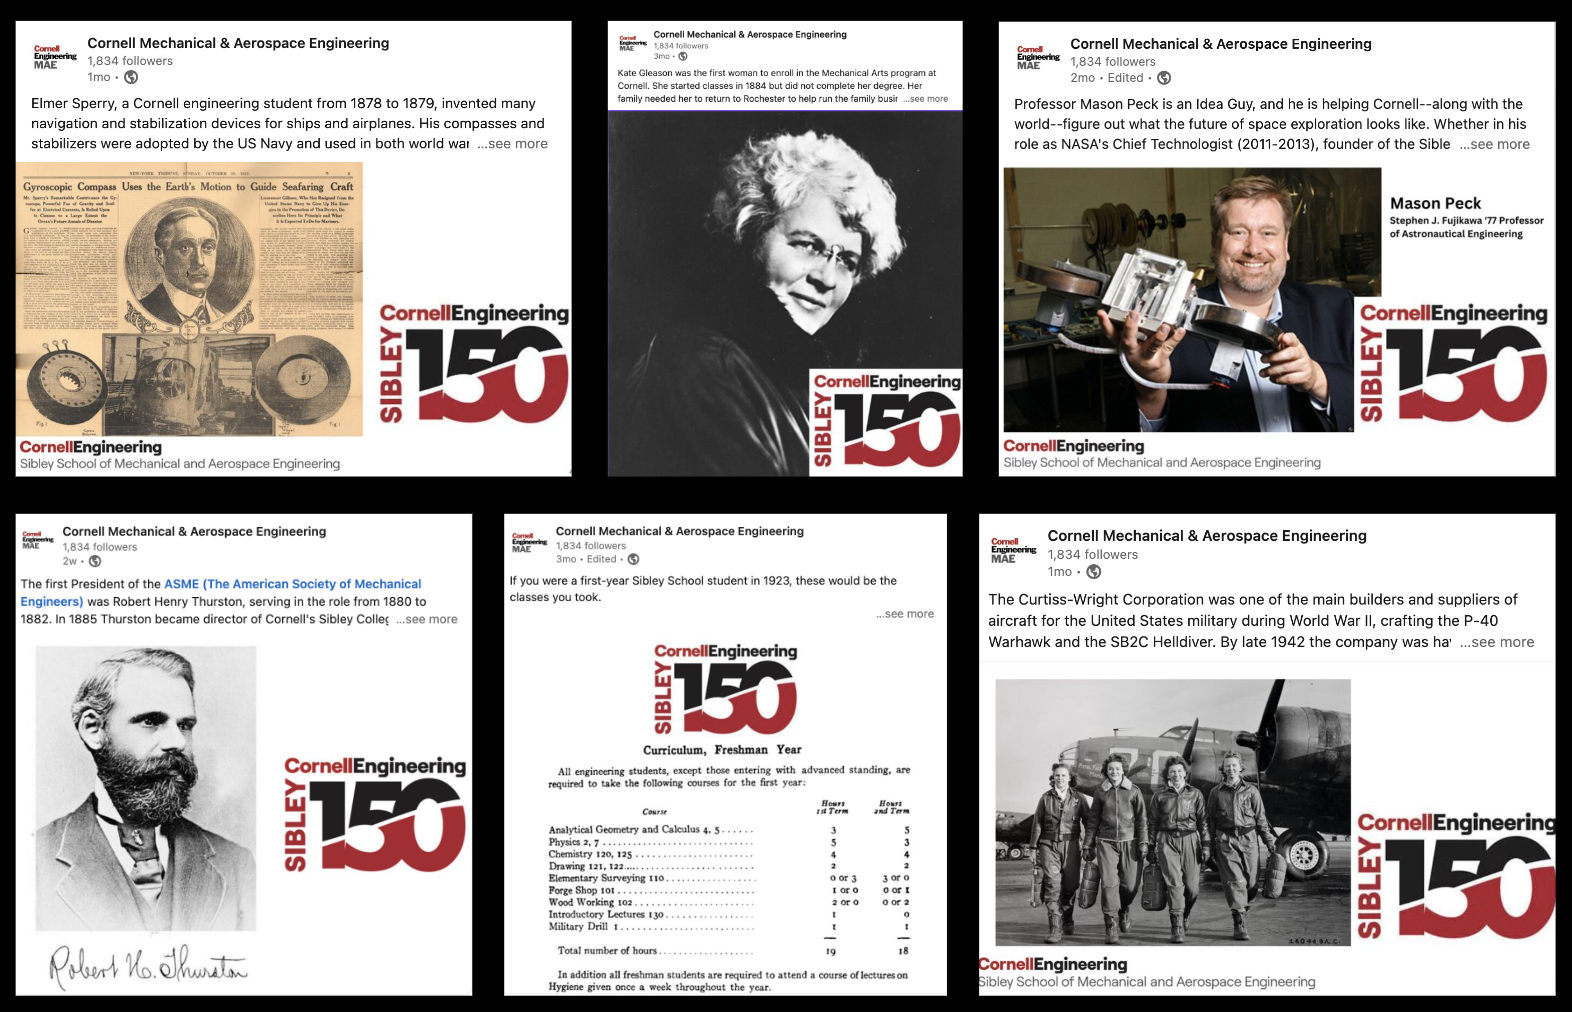 This is a composite picture of 6 LinkedIn posts featuring people, places, things, and information from the 150 year history of the Sibley School. The posts feature Sibley alumni and inventor Elmer Sperry, female Sibley student from 1884 Kate Gleason, current Sibley Professor Mason Peck, former Sibley director Robert Thurston, a group of female pilots from World War II who trained at Cornell, and a page from the 1923 student handbook listing the classes first-year students are required to take.